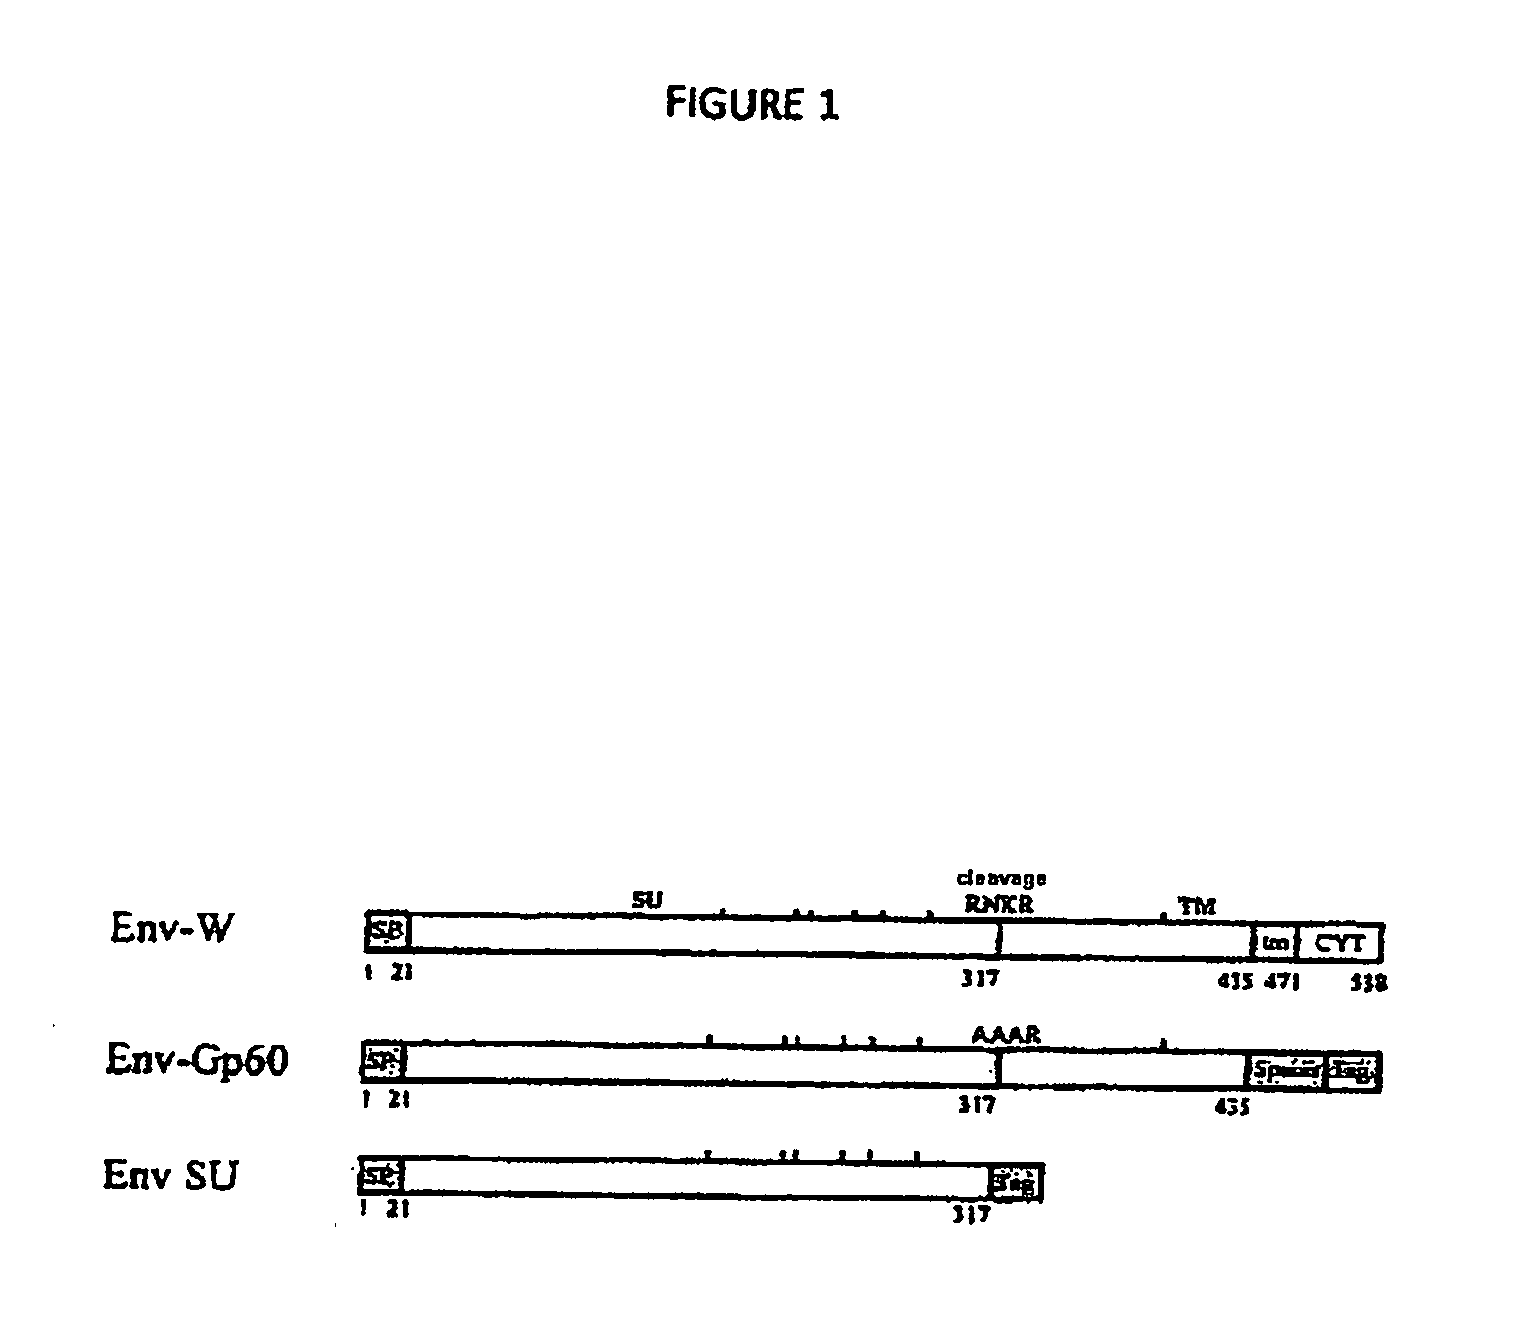 Pharmaceutical composition containing antibodies directed against the herv-w envelope